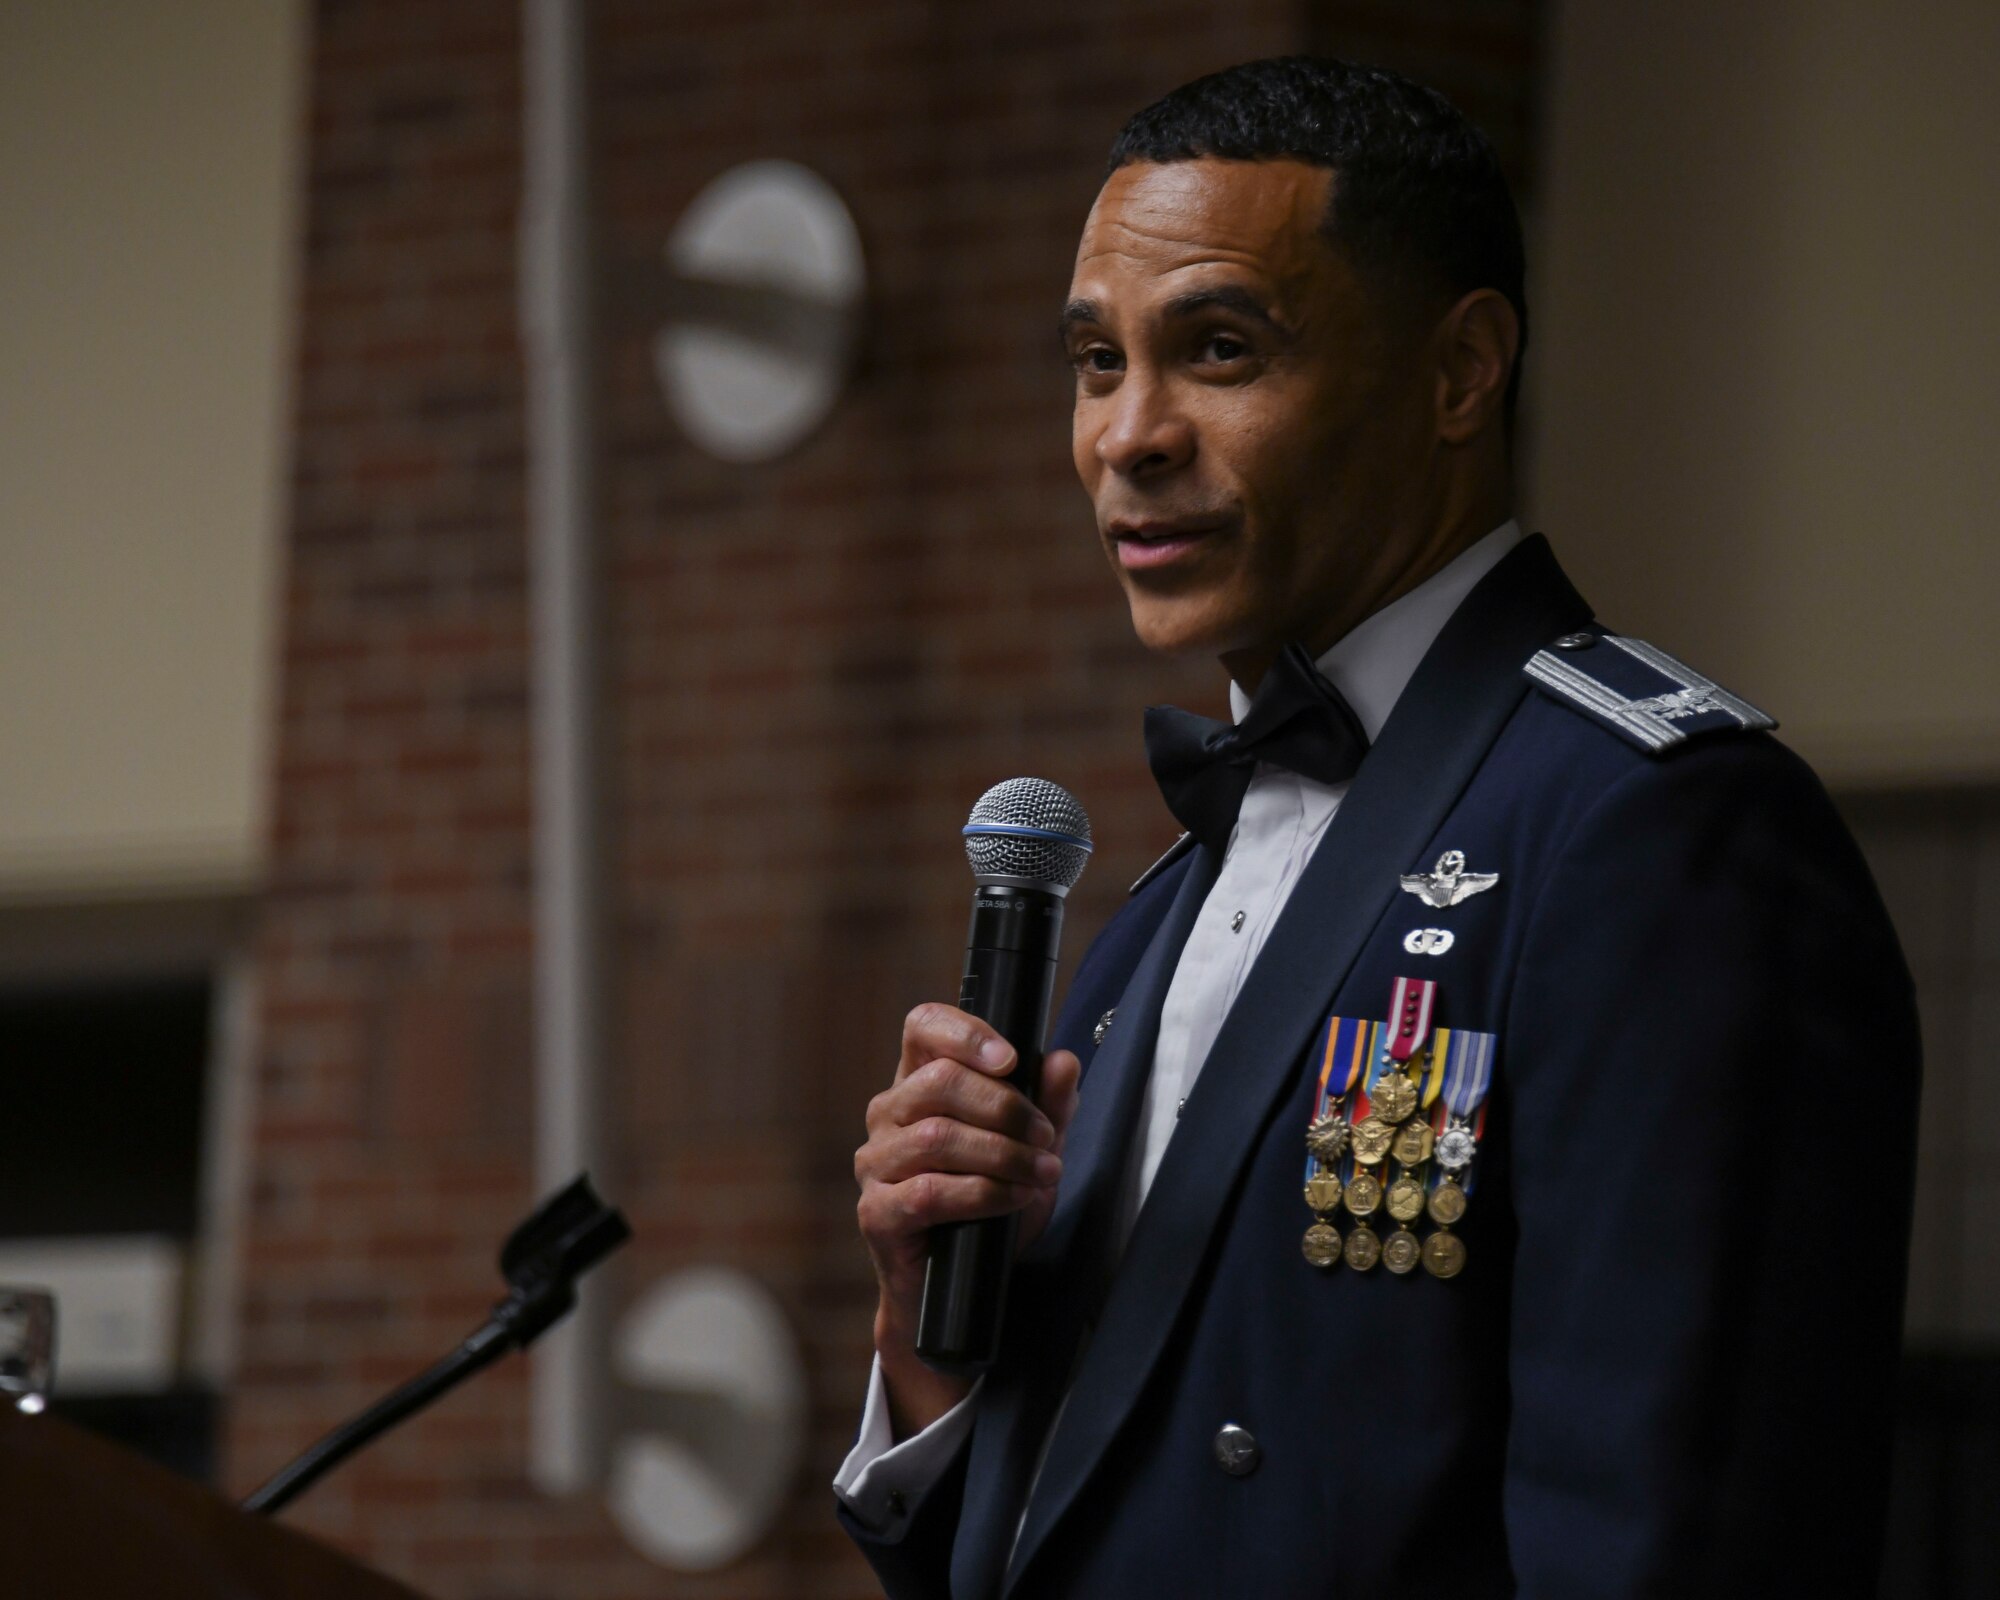 U.S. Air Force Col. Timothy Curry, 319th Reconnaissance Wing commander, speaks during the 319th RW’s celebration of the Air Force’s 75th birthday at the Ralph Englestad Arena in Grand Forks, North Dakota, Sept. 16, 2022. The theme for the ball called airmen to “Innovate, Accelerate and Thrive,” to celebrate what the Air Force was able to accomplish over the past 75 years of service and to look forward to a bright future. (U.S. Air Force photo by Senior Airman Roxanne A. Belovarac)